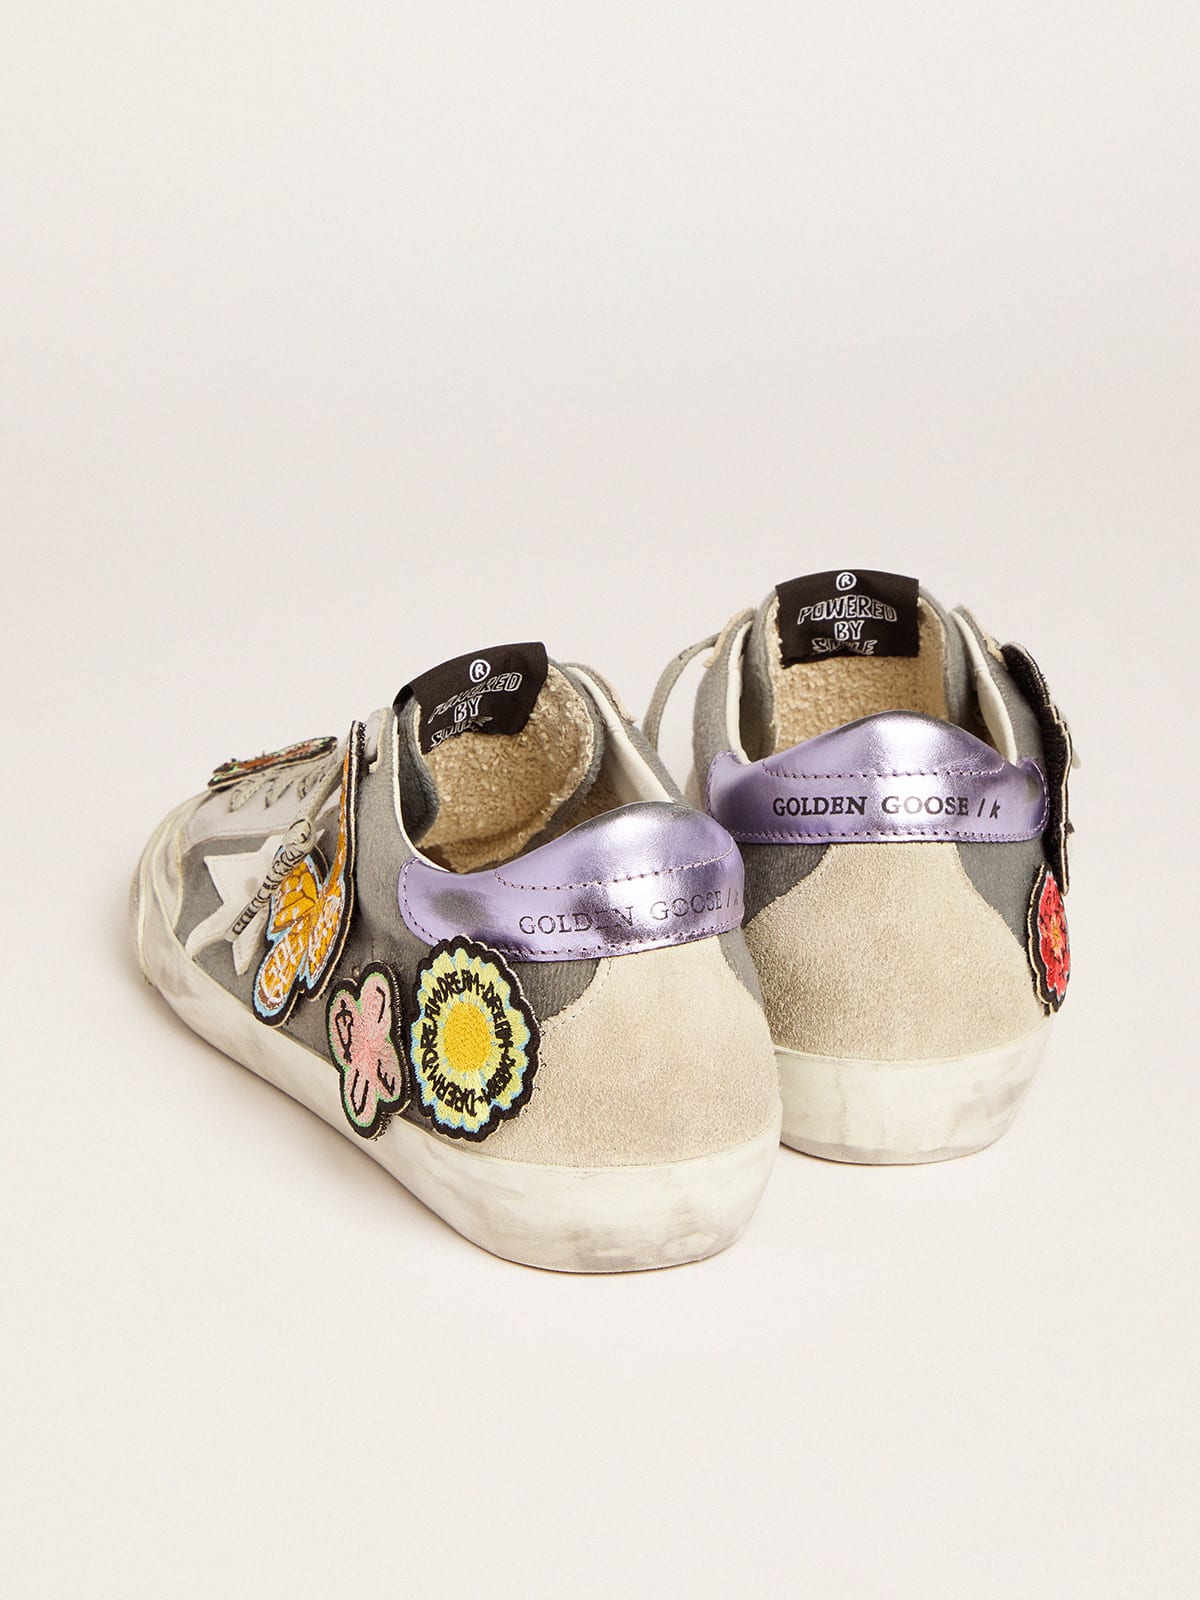 Golden Goose - Super-Star Penstar LAB sneakers with Velcro upper and appliquéd patches in 